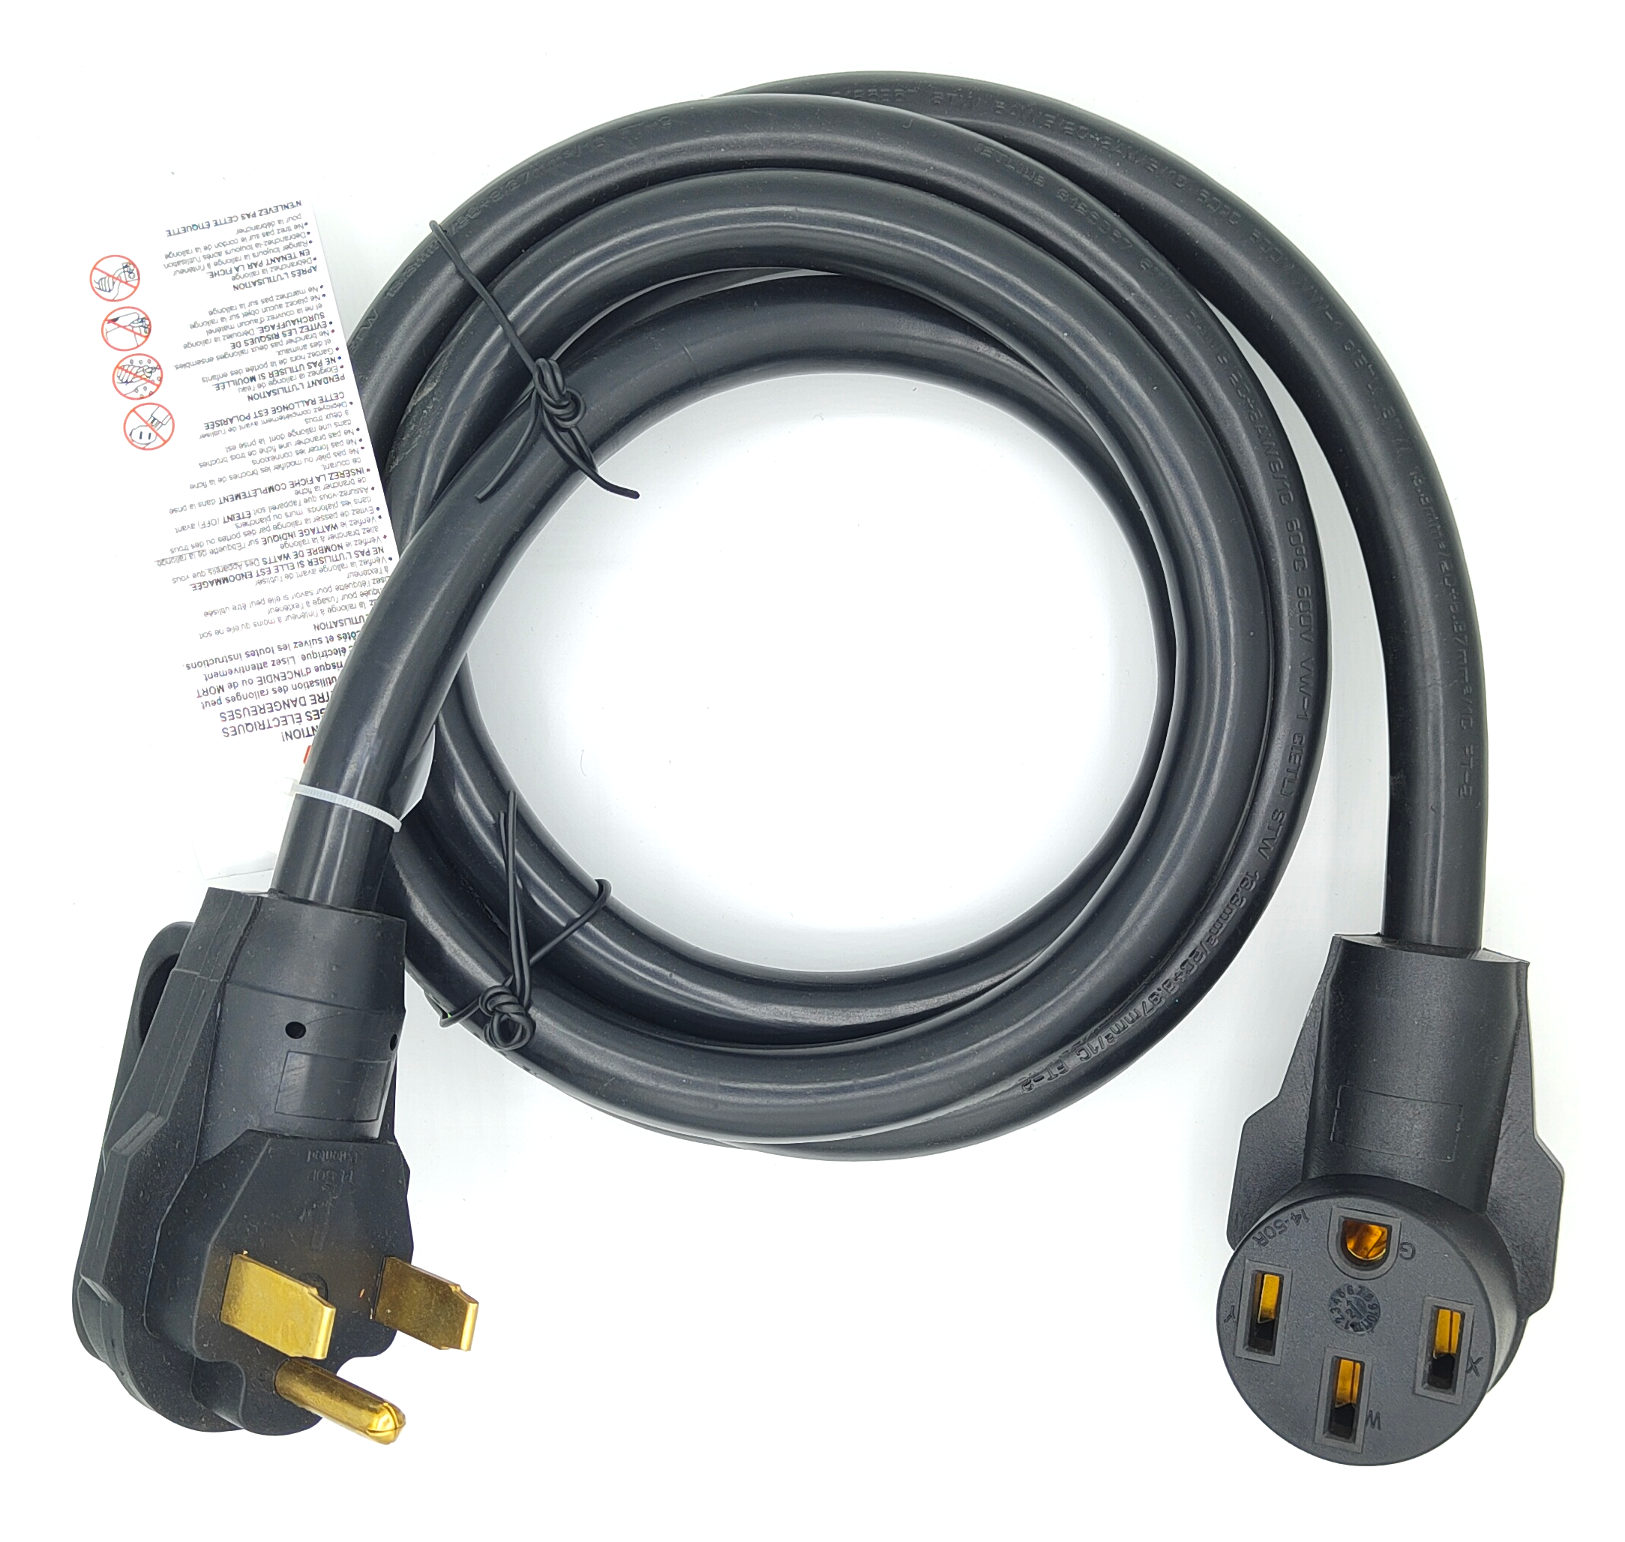 Nema 14 50 Extension Cord For Electric Vehicle Only 10 Ft Evse Adapters